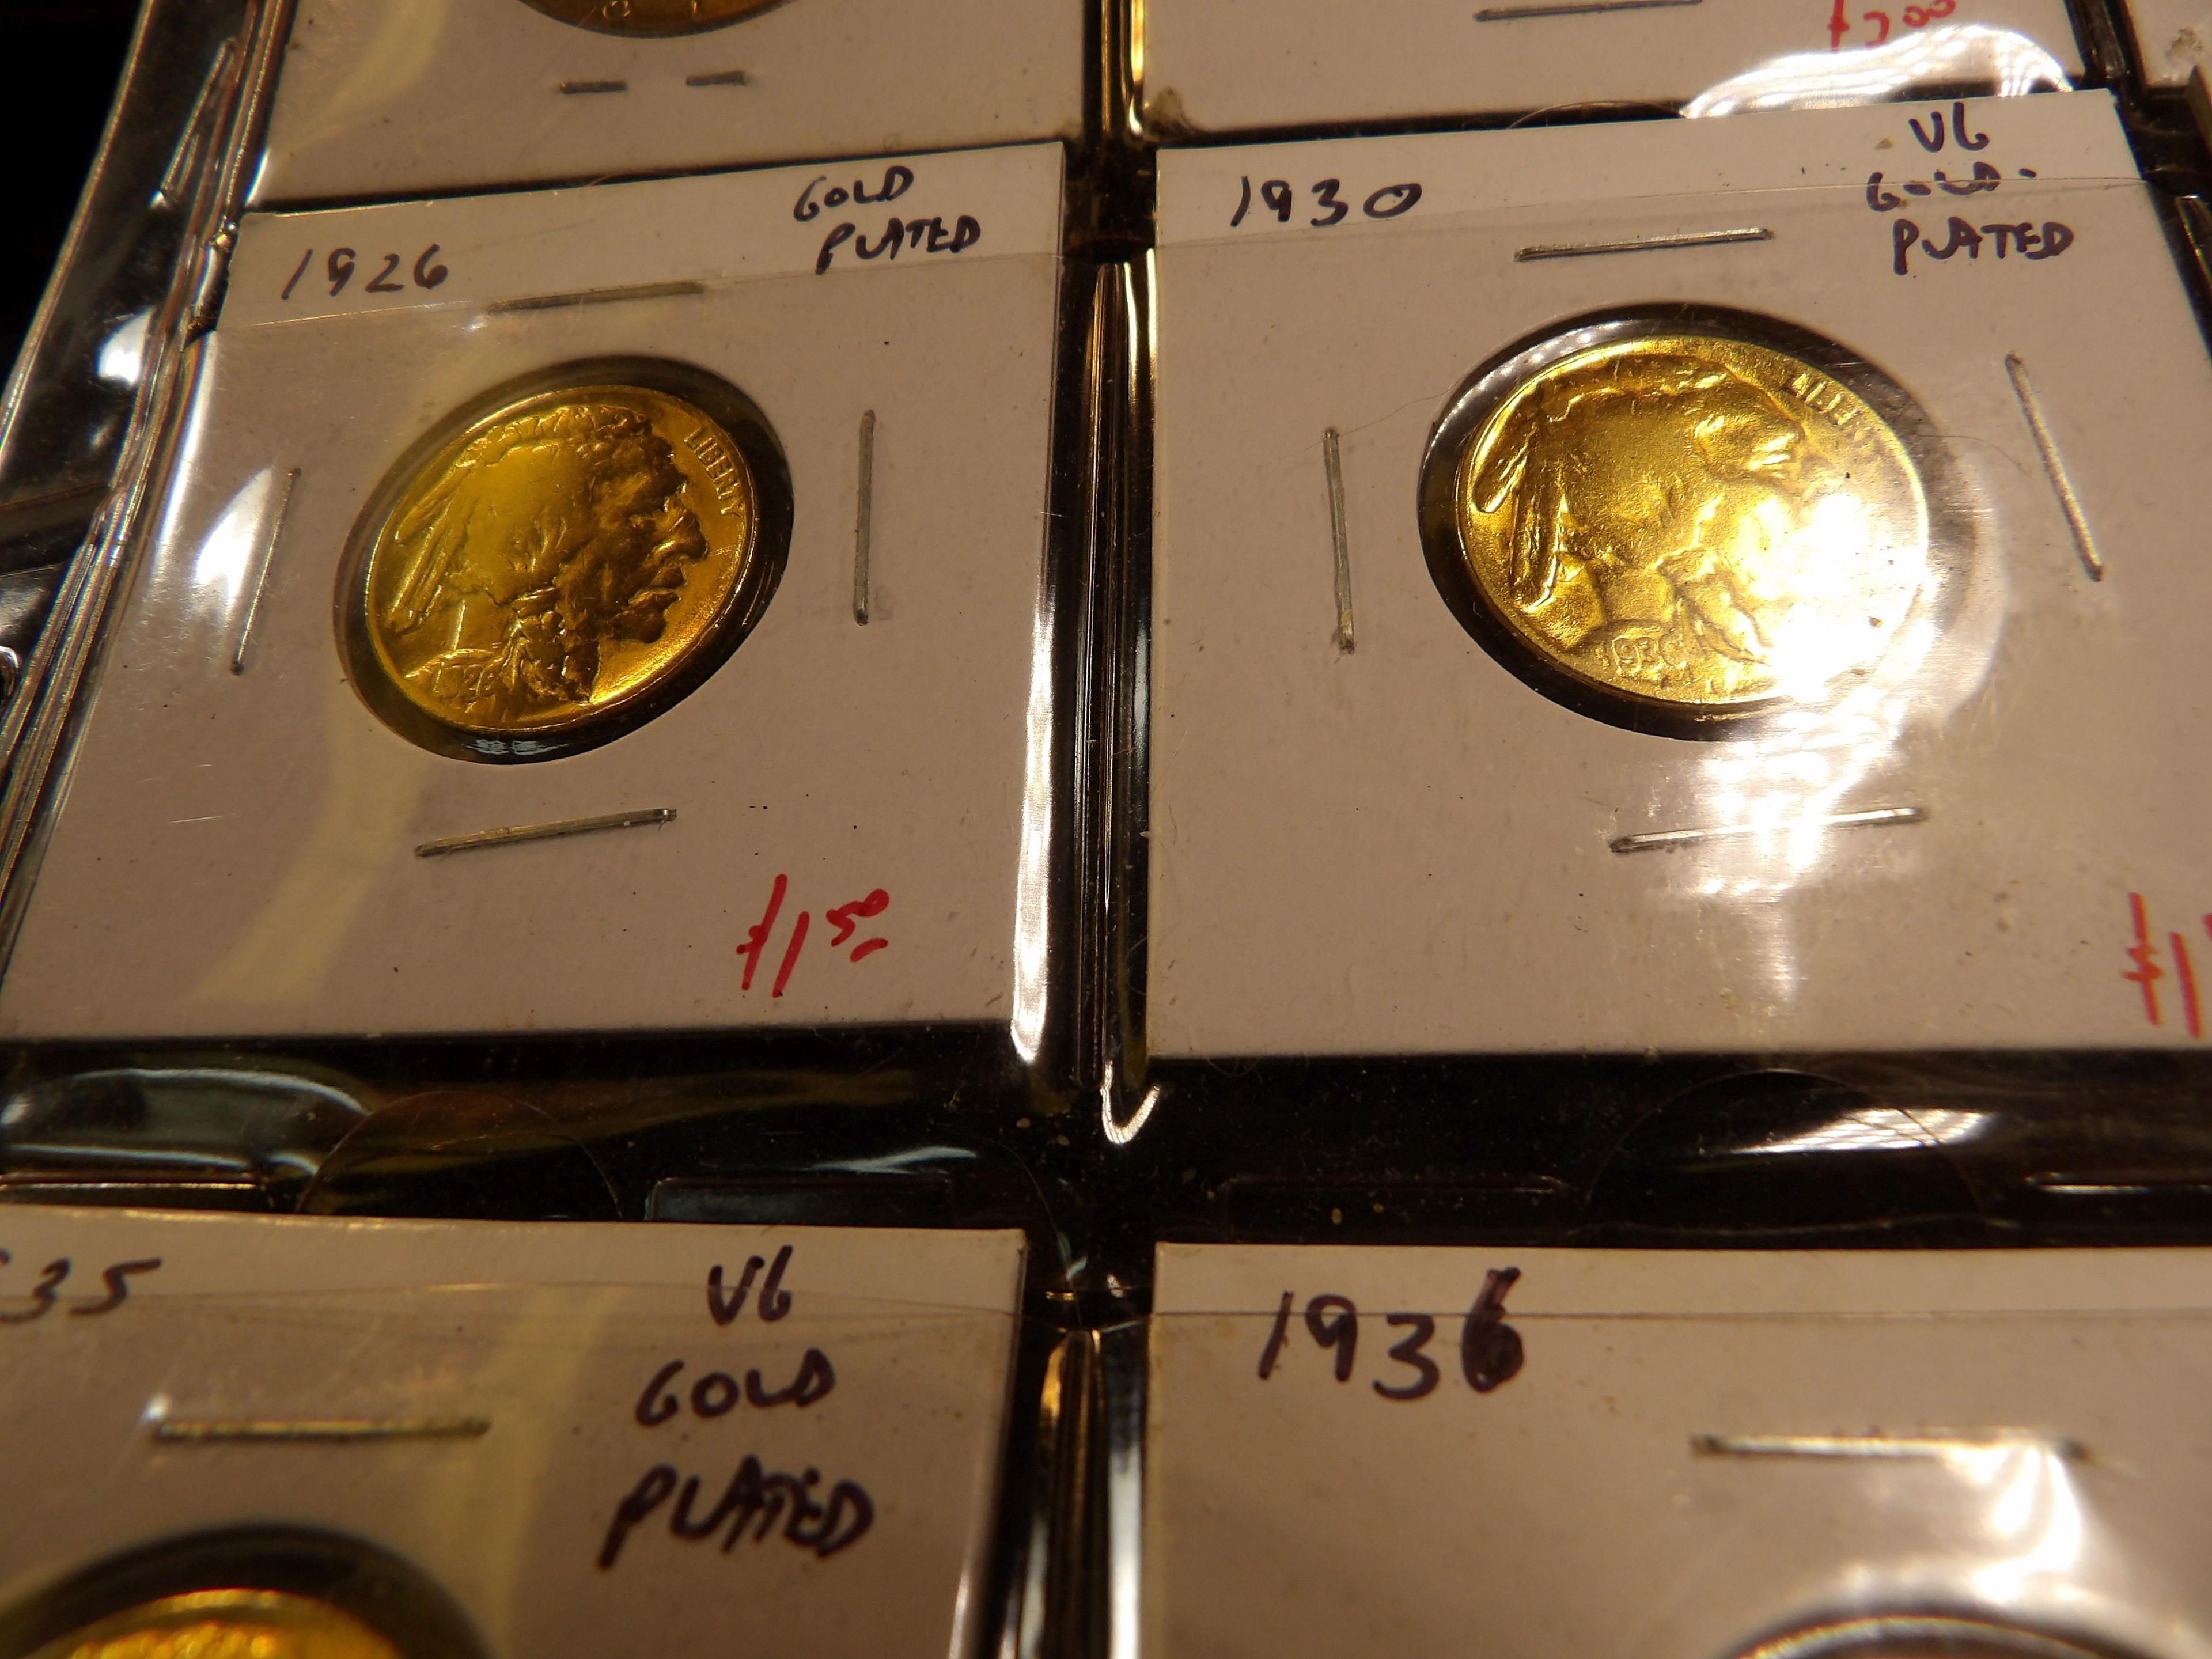 Collector Page with 20 colorized/gold-plated novelty coins.